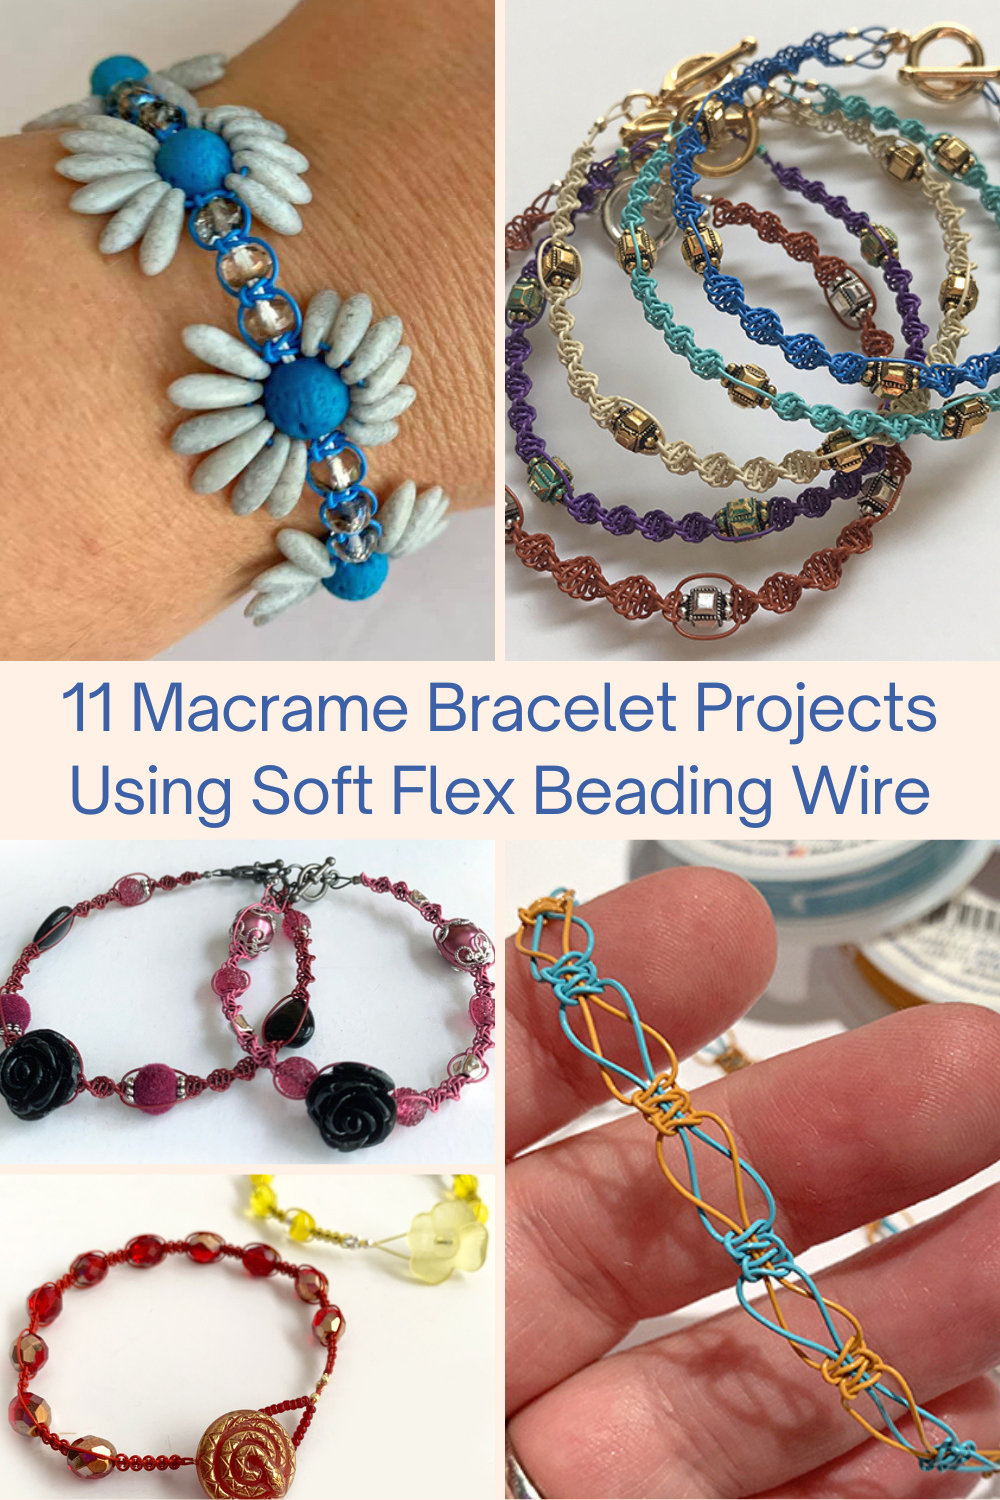 11 Macrame Bracelet Projects Using Soft Flex Beading Wire Collage